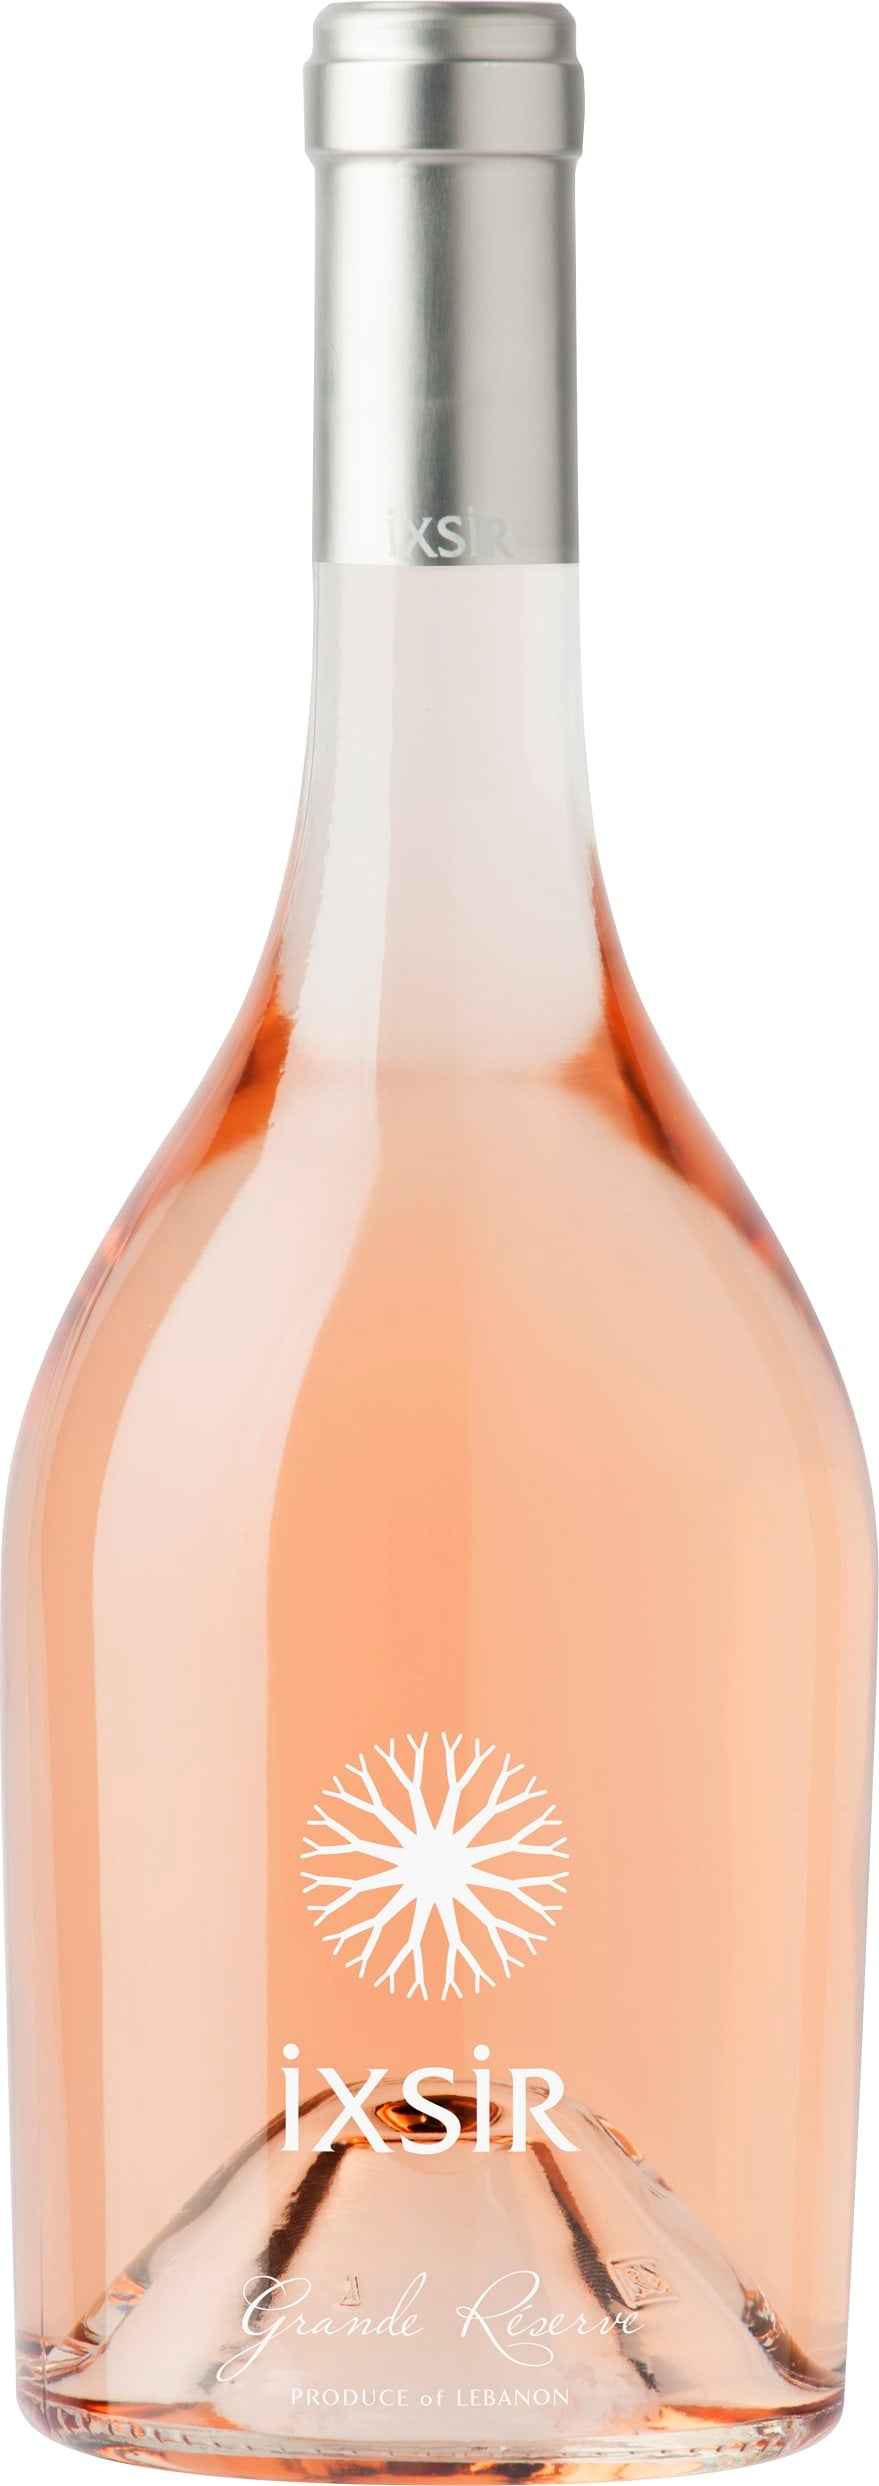 Ixsir Grande Reserve Rose 2019 75cl - Buy Ixsir Wines from GREAT WINES DIRECT wine shop